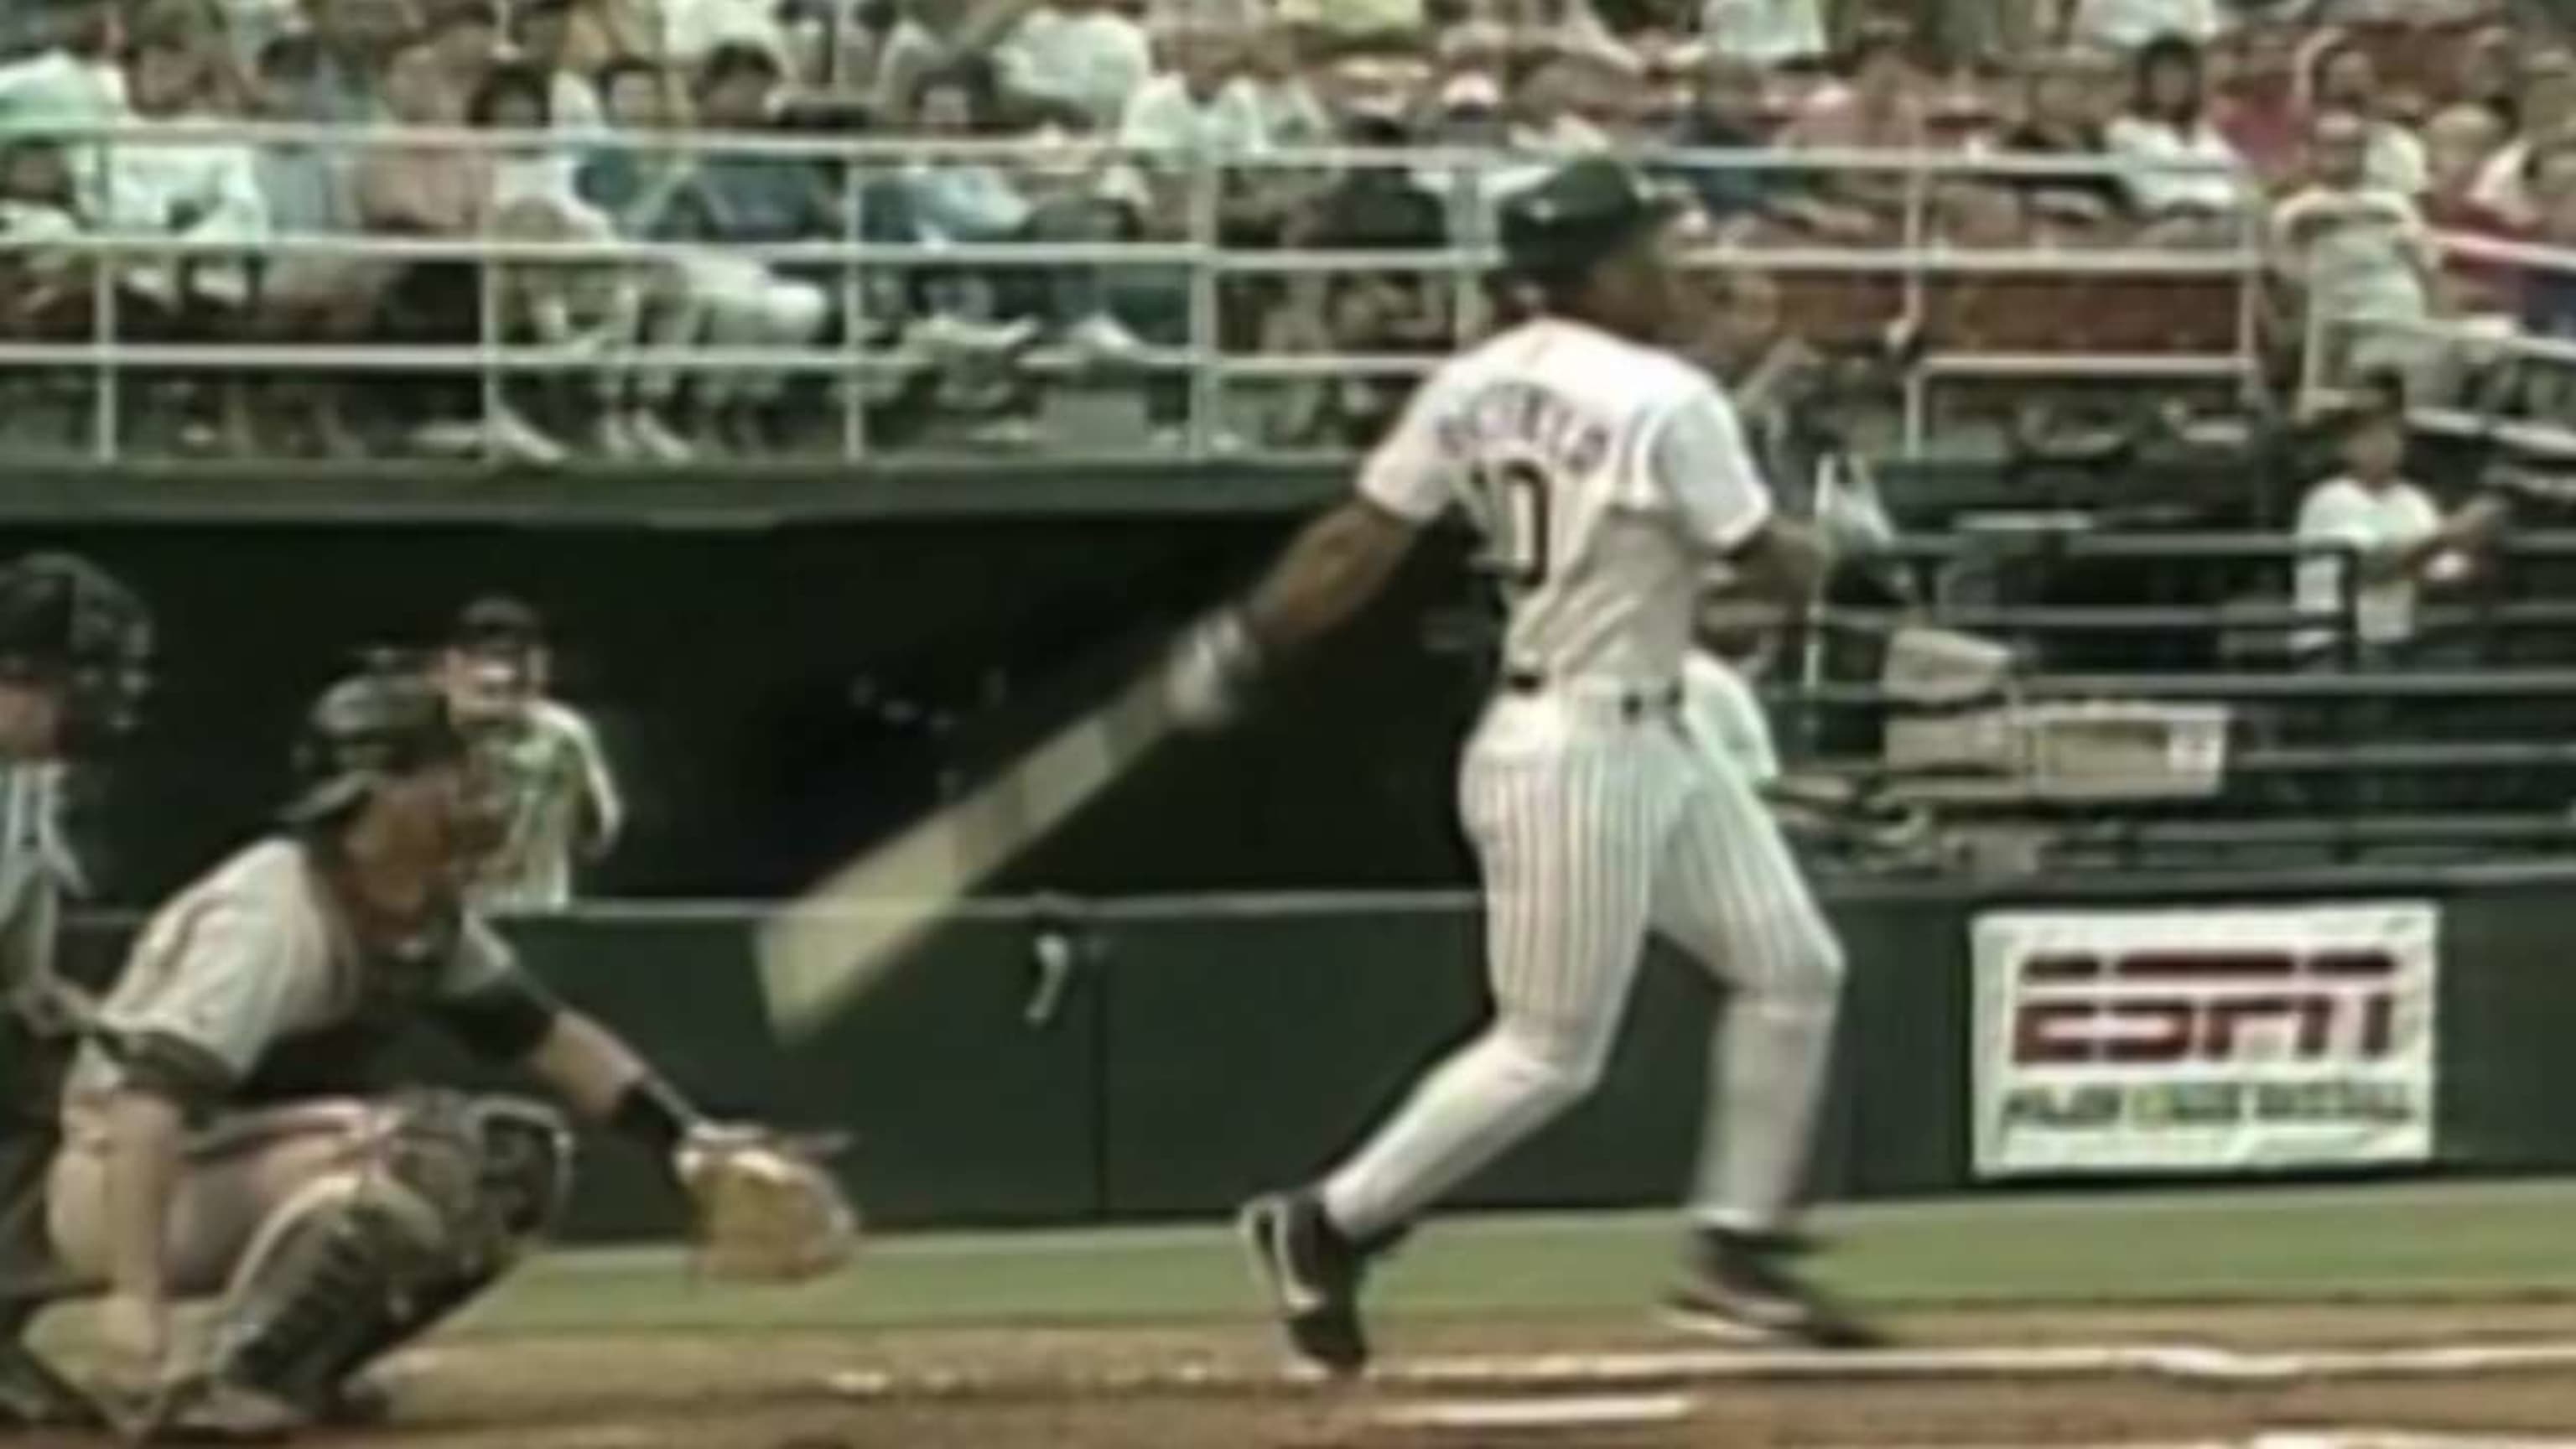 What to know about Gary Sheffield's special career - Fish Stripes